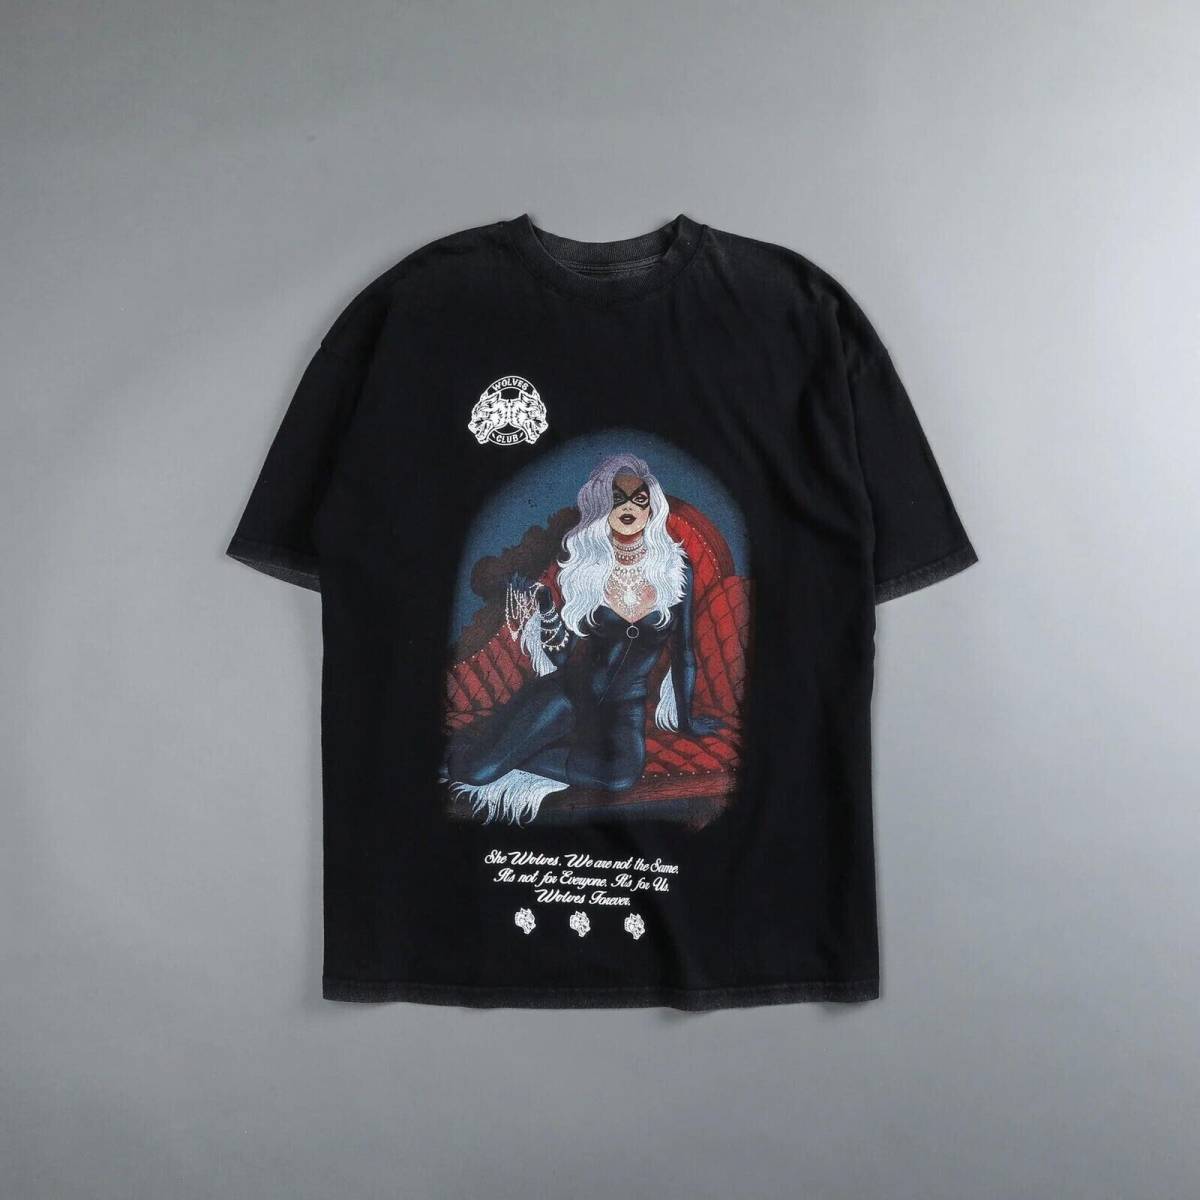 Darc Sport x Marvel "You Wouldn't Get It" Oversized T-Shirt Size S SOLD OUT 海外 即決